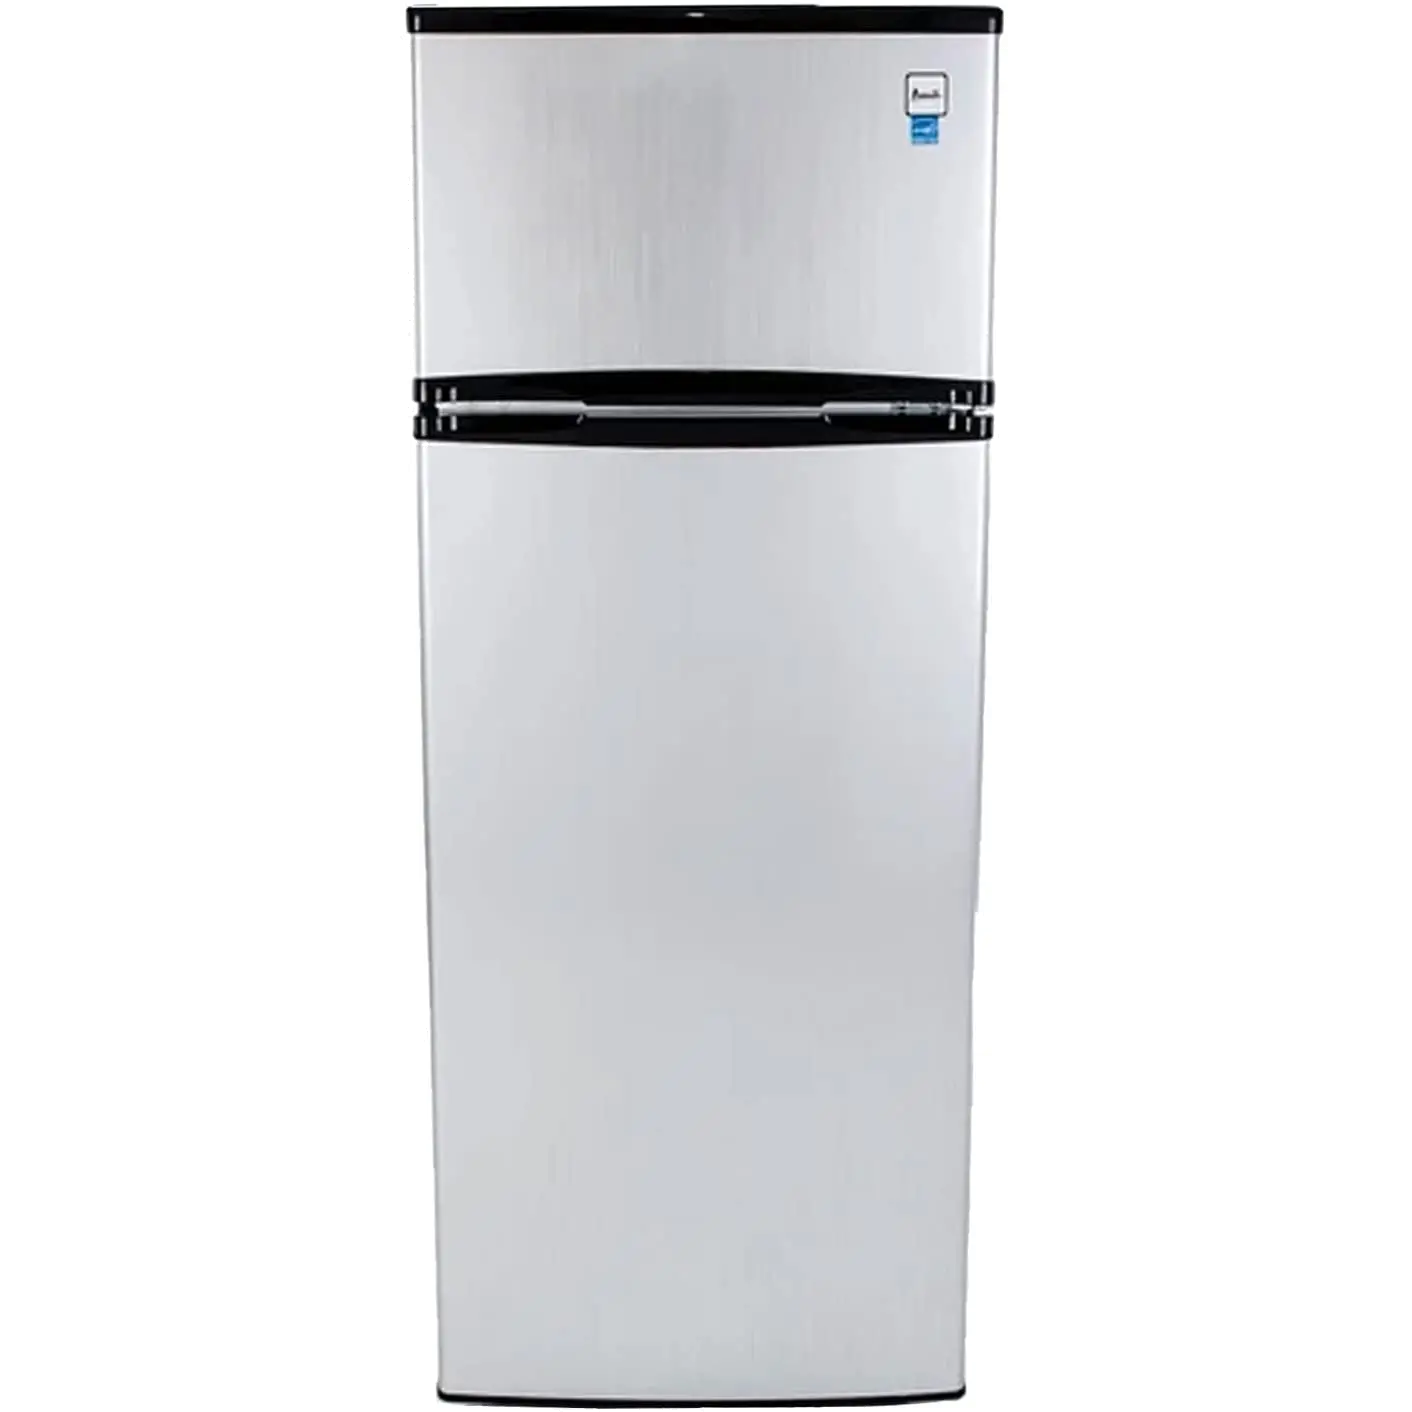 RA7316PST Avanti 7.4 cu ft Compact Refrigerator with Freezer - Stainless Steel-1